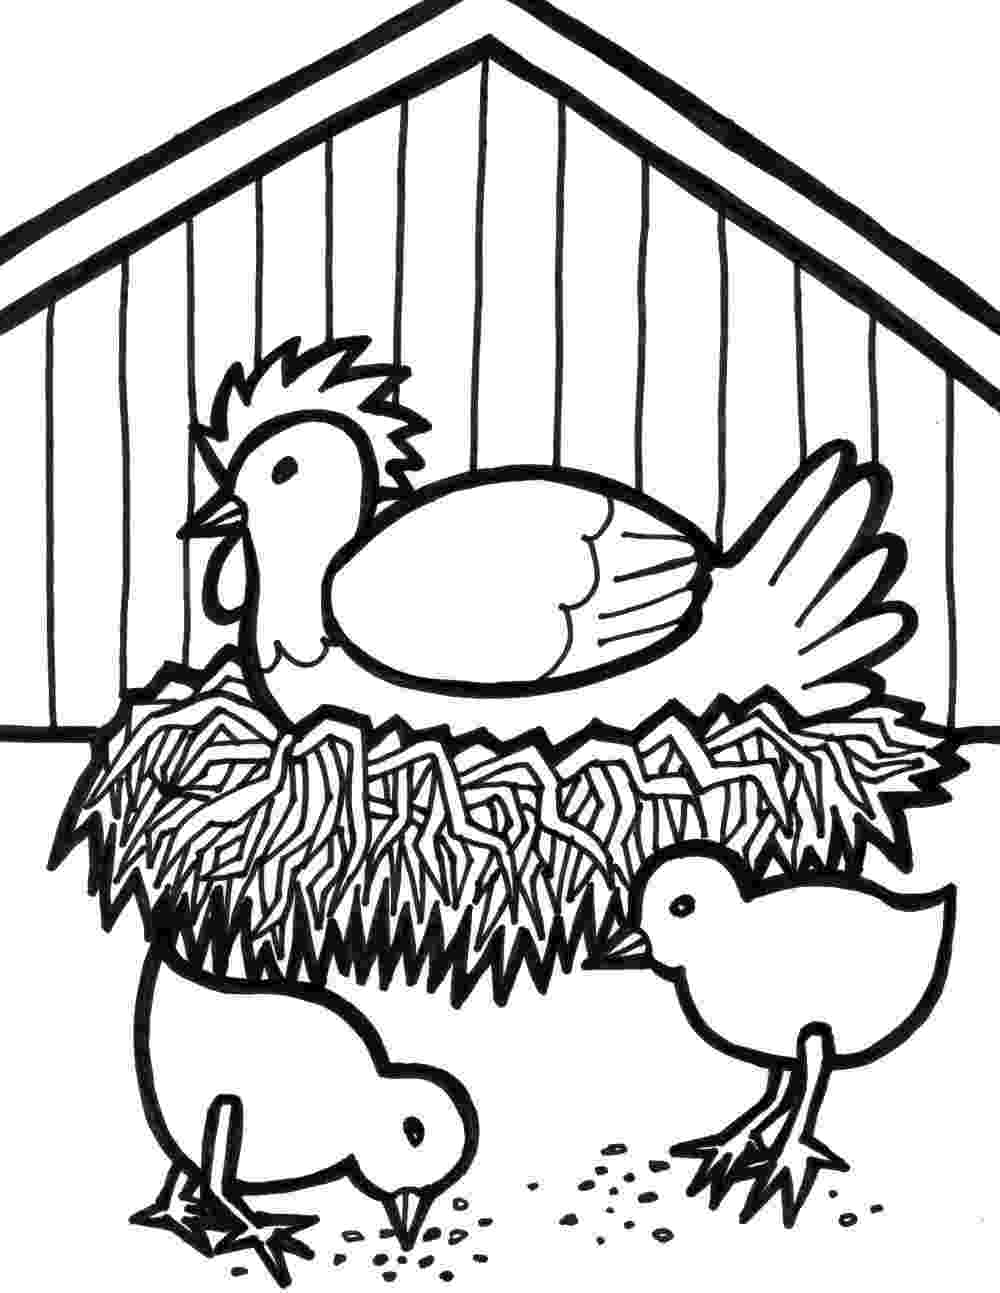 small colouring pictures of farm animals farm animal coloring pages to download and print for free colouring farm animals of pictures small 